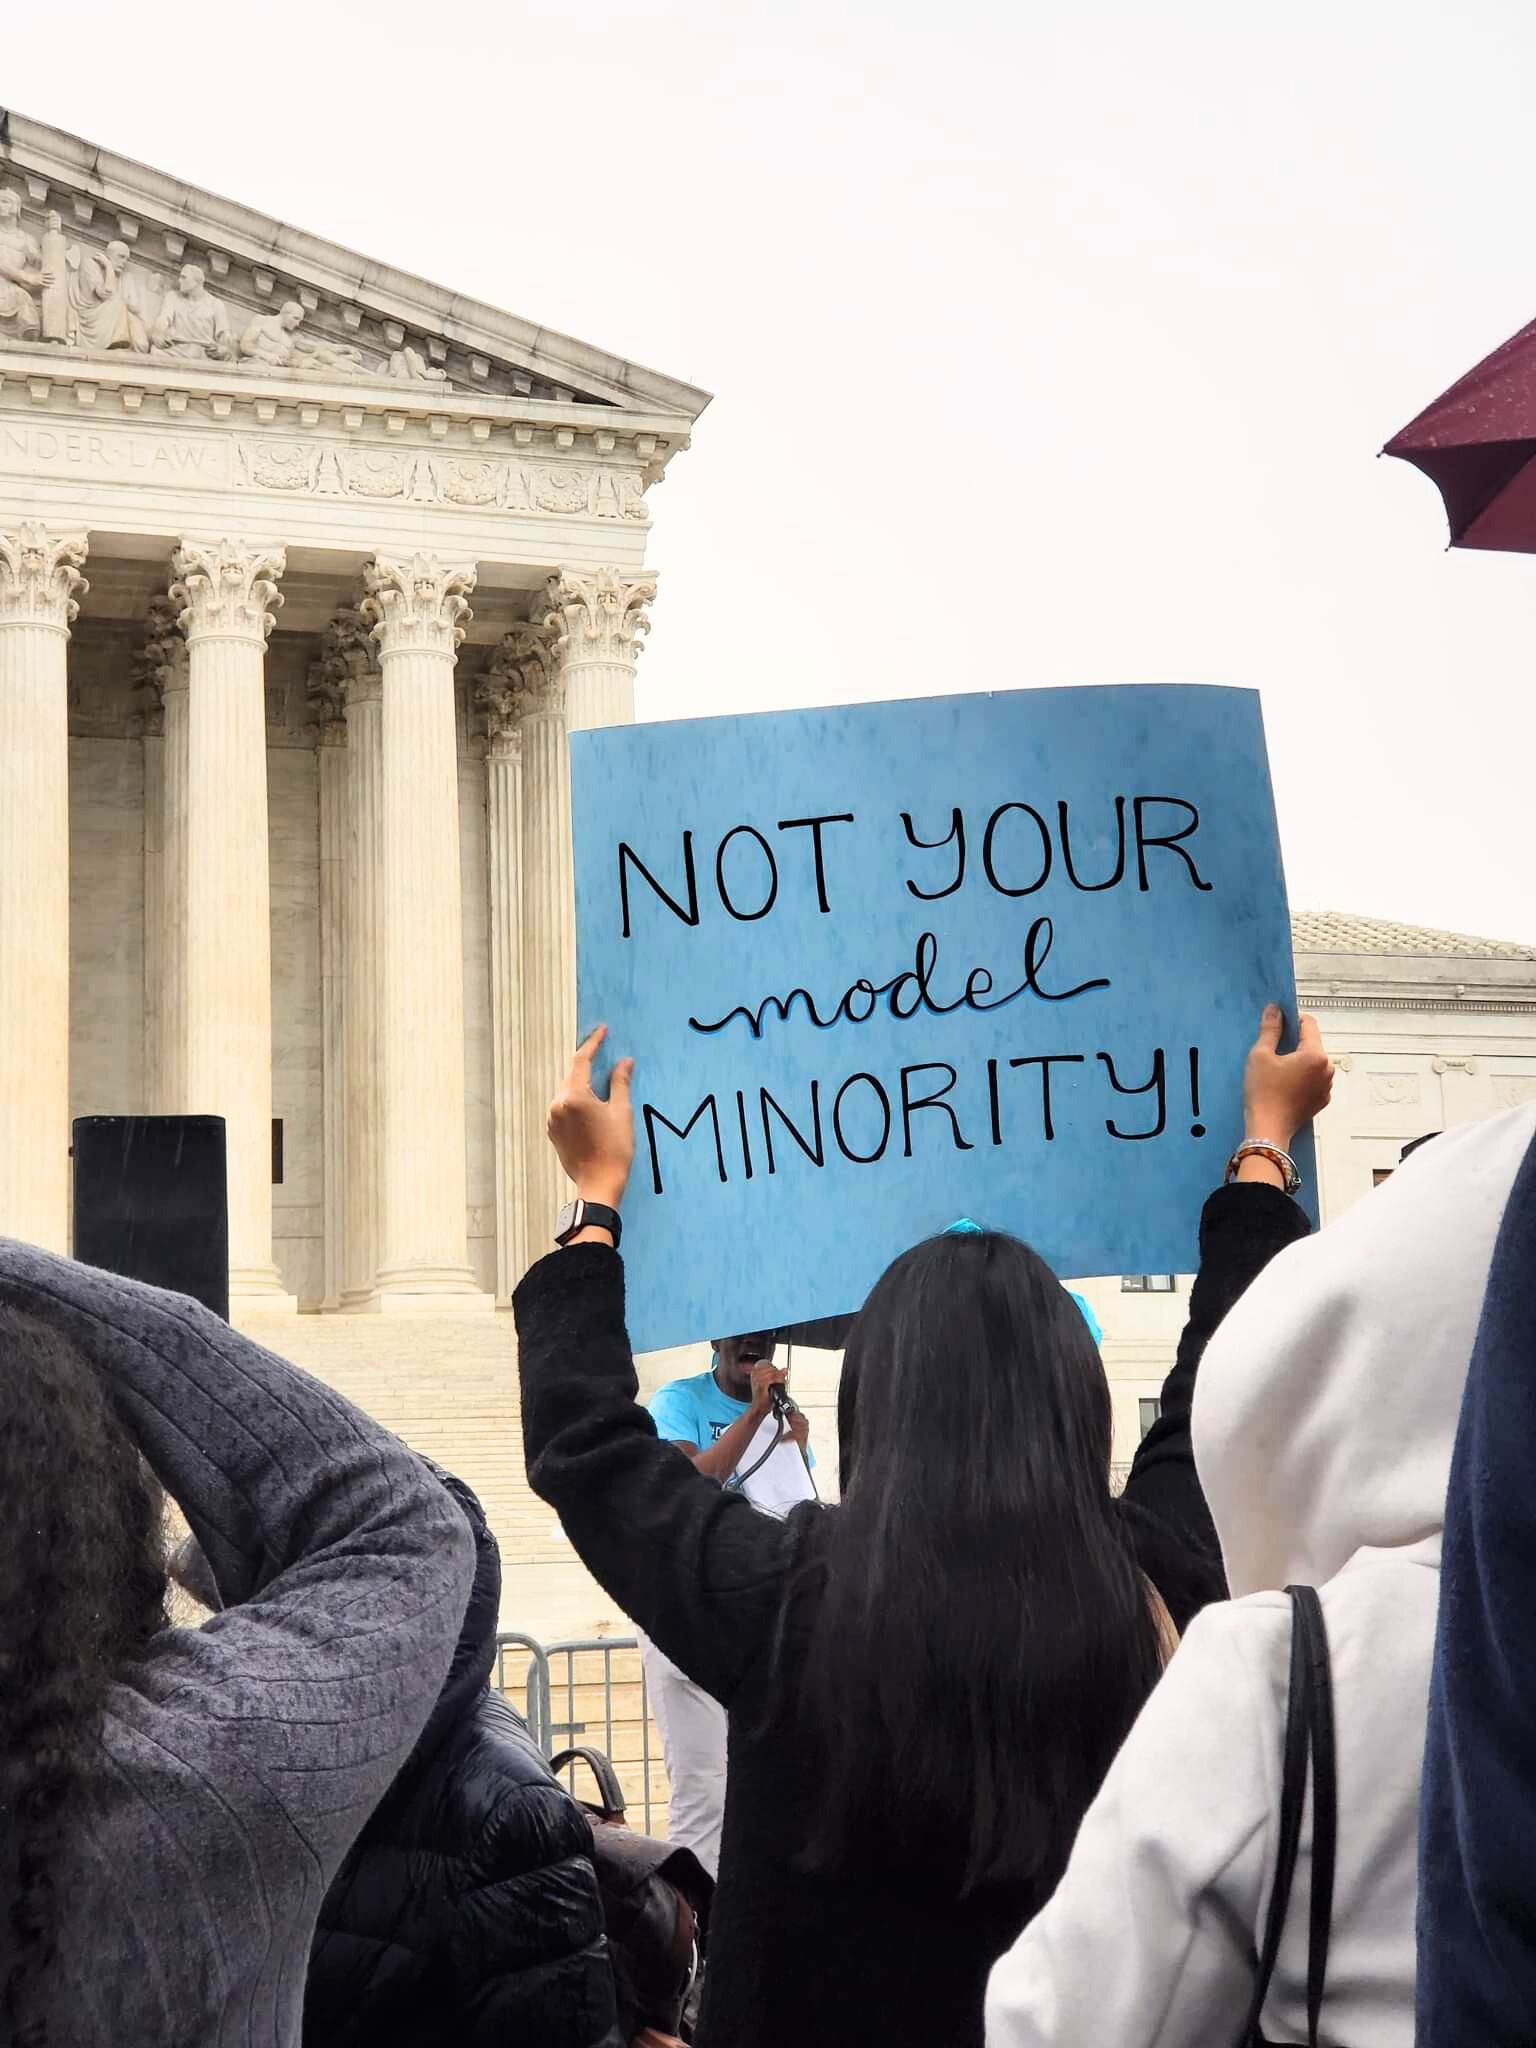 Affirmative Action Resources Responding to the Supreme Court Decision